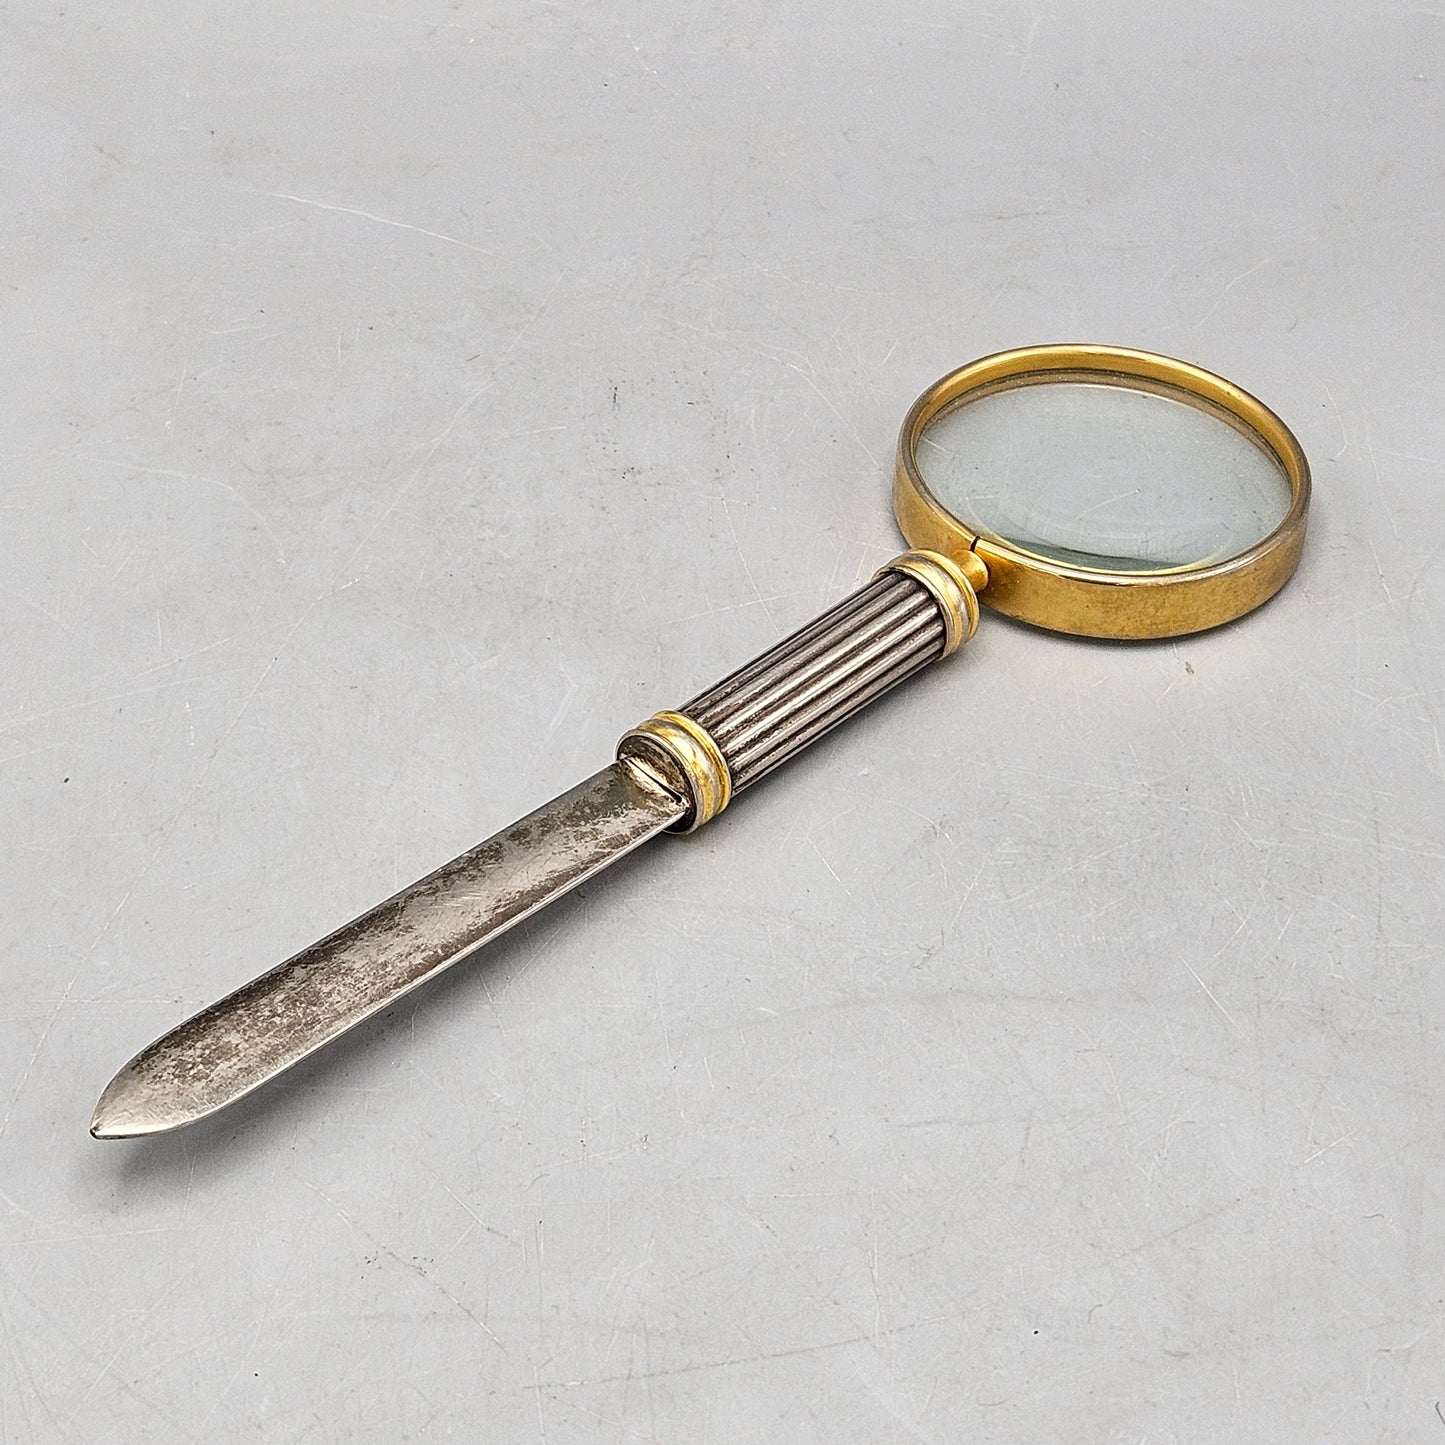 Vintage Letter Opener with Magnify Glass